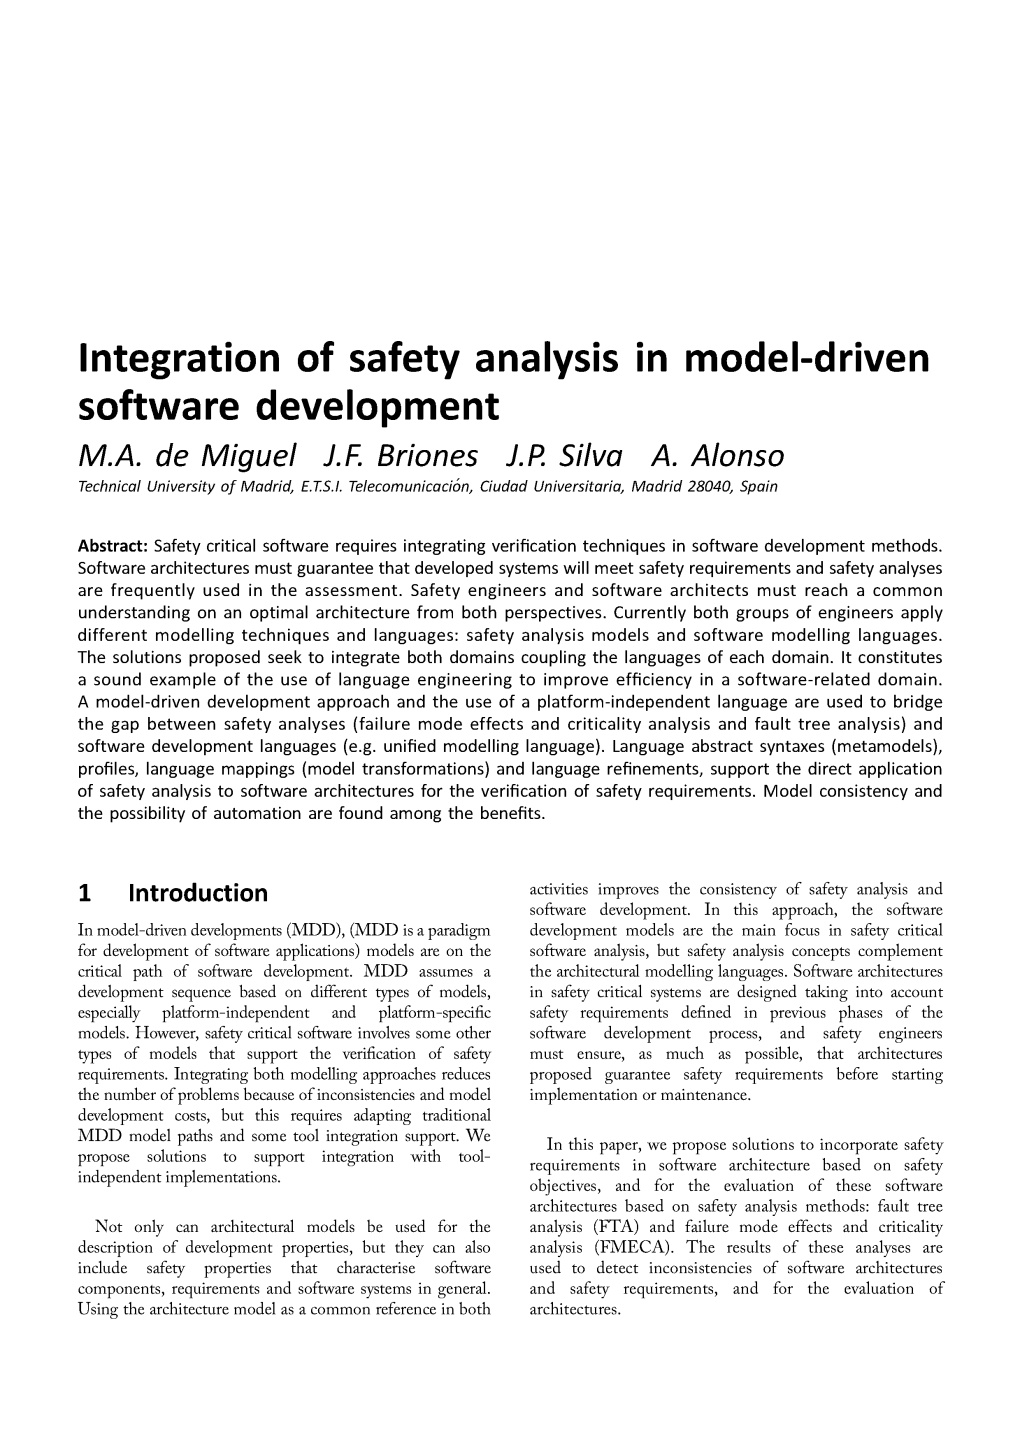 Integration of Safety Analysis in Model-Driven Software Development M.A